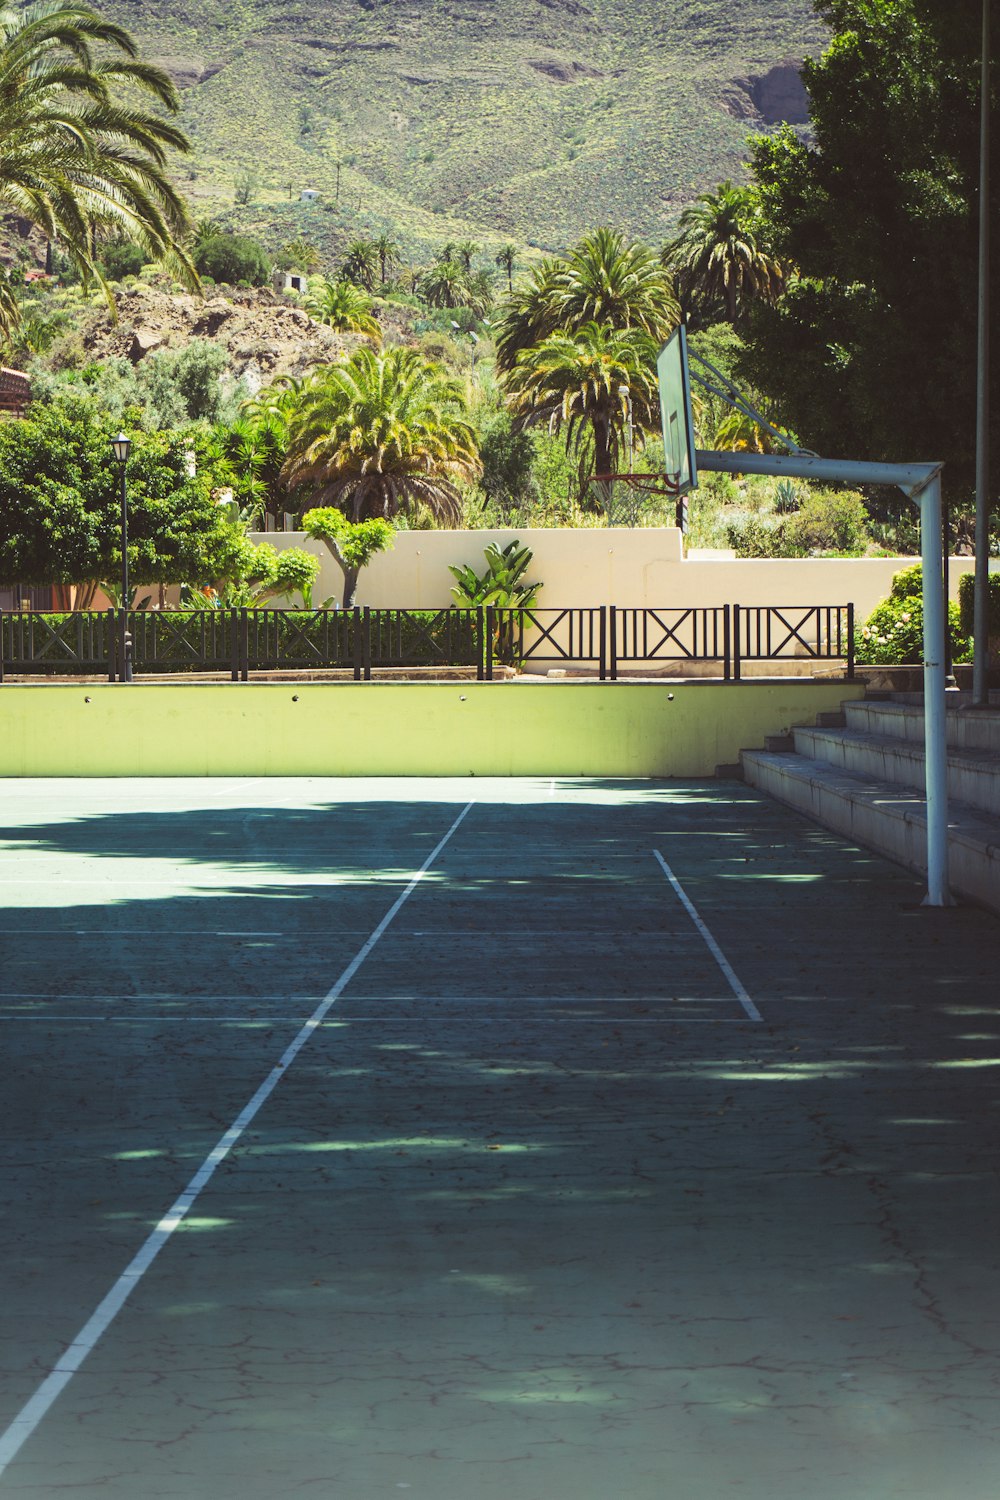 a tennis court with trees and a hill in the background